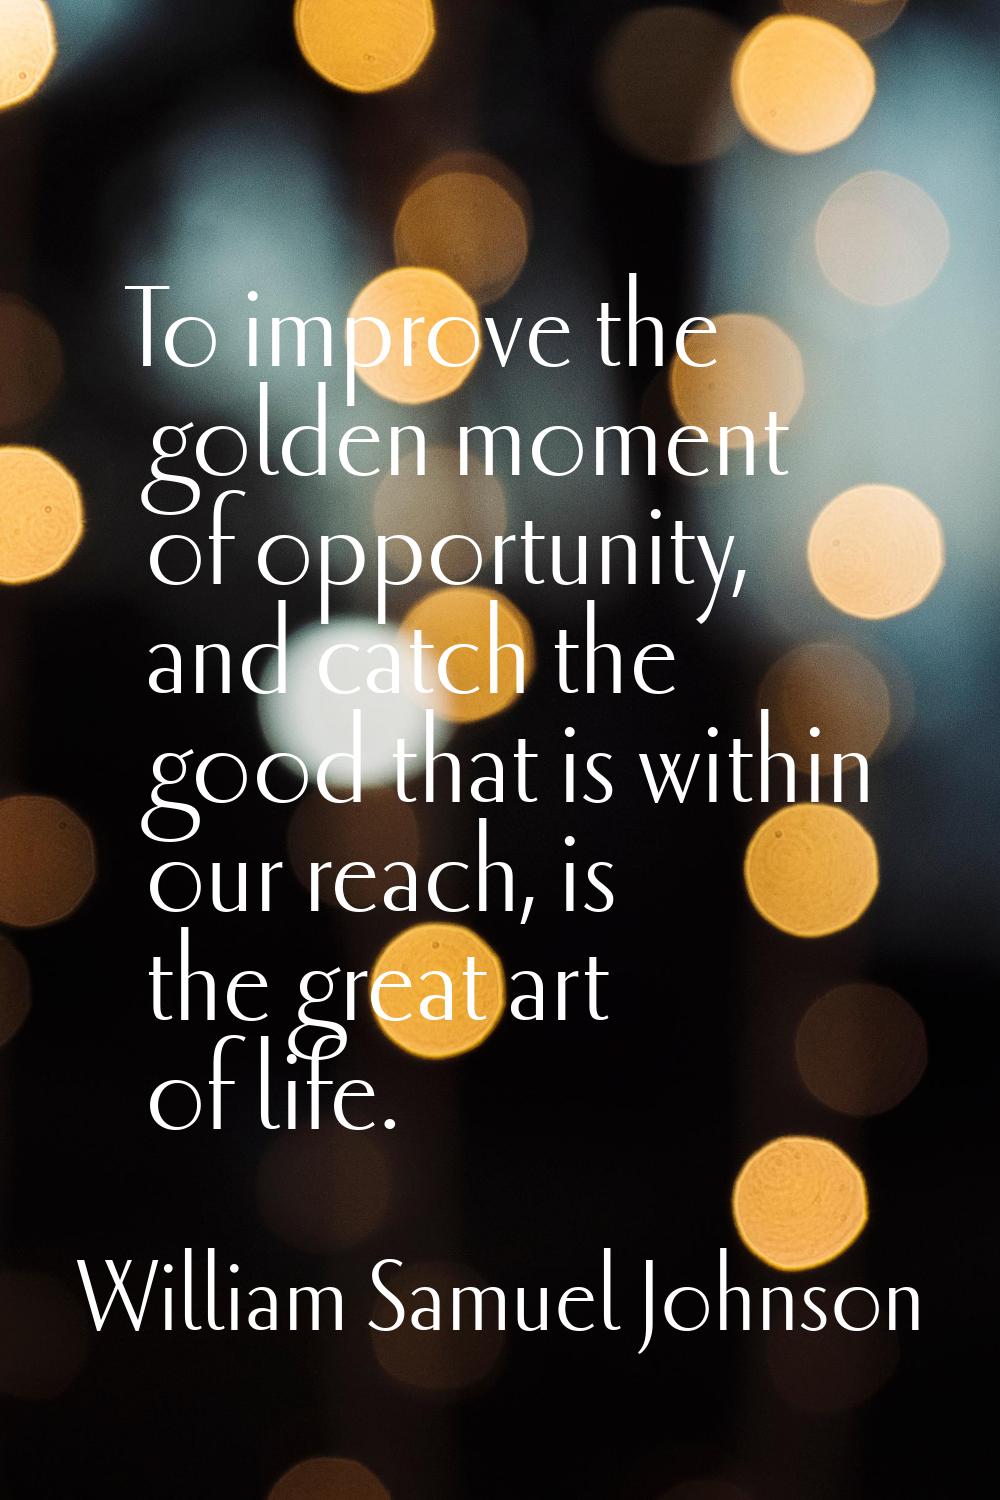 To improve the golden moment of opportunity, and catch the good that is within our reach, is the gr